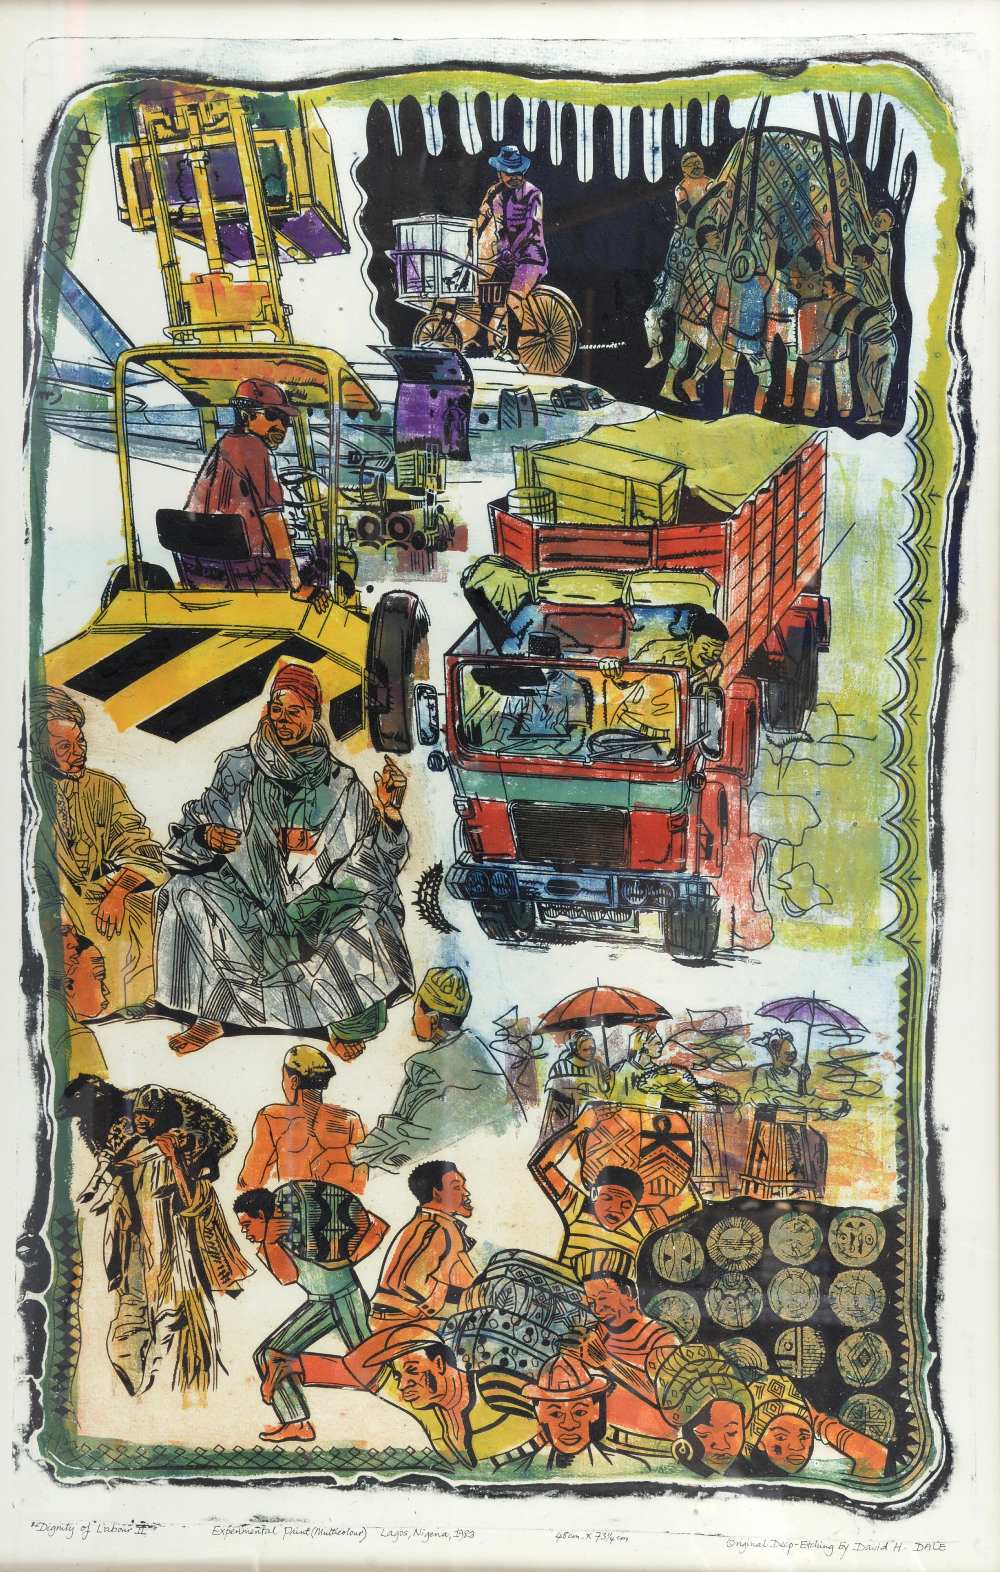 David H Dale, 'Dignity of Labour II', Lagos, Nigeria 1983, artist's proof (multicolour), signed, - Image 2 of 3